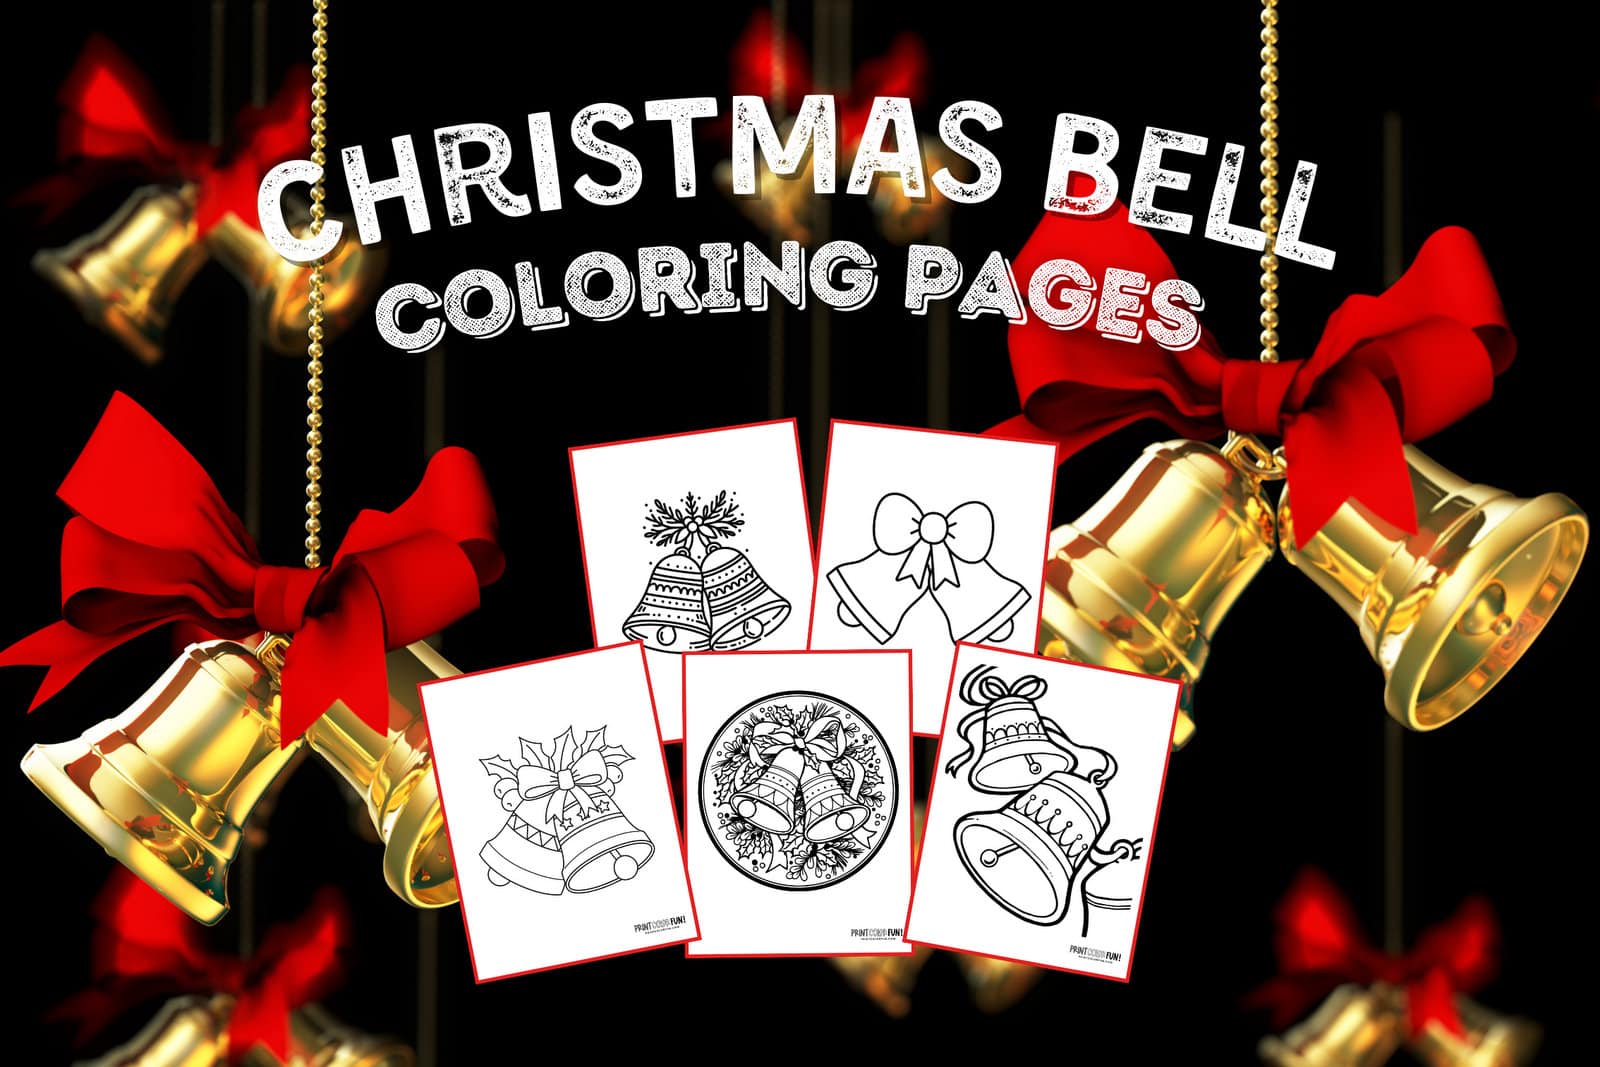 10 Christmas bells clipart & coloring pages to ring in the holiday –  perfect for creative family fun!, at